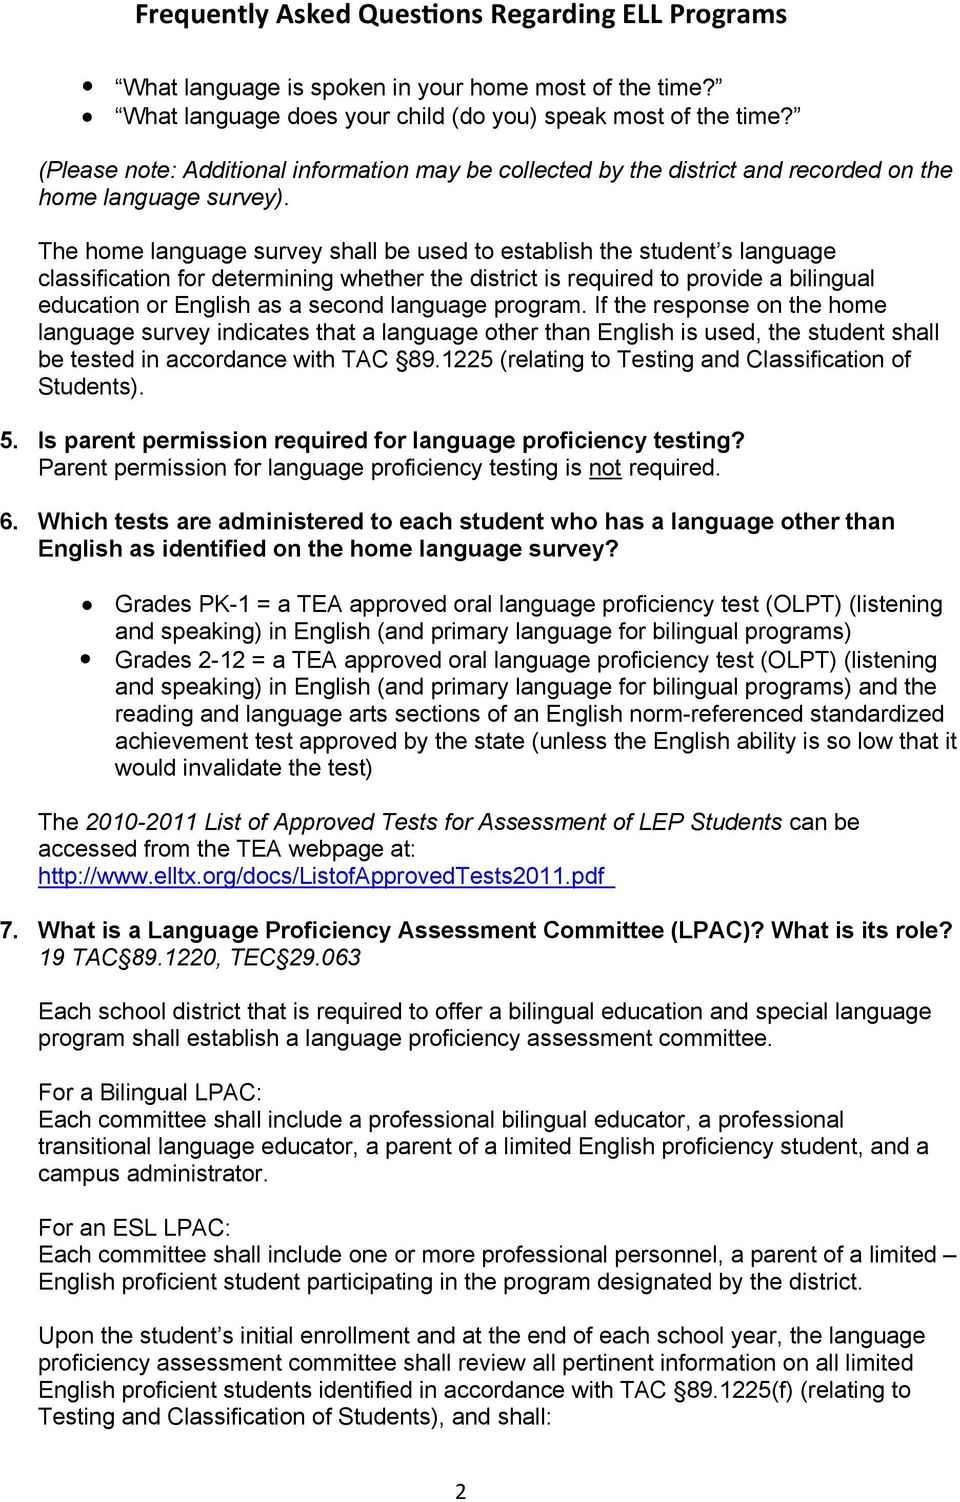 The home language survey shall be used to establish the student s language classification for determining whether the district is required to provide a bilingual education or English as a second